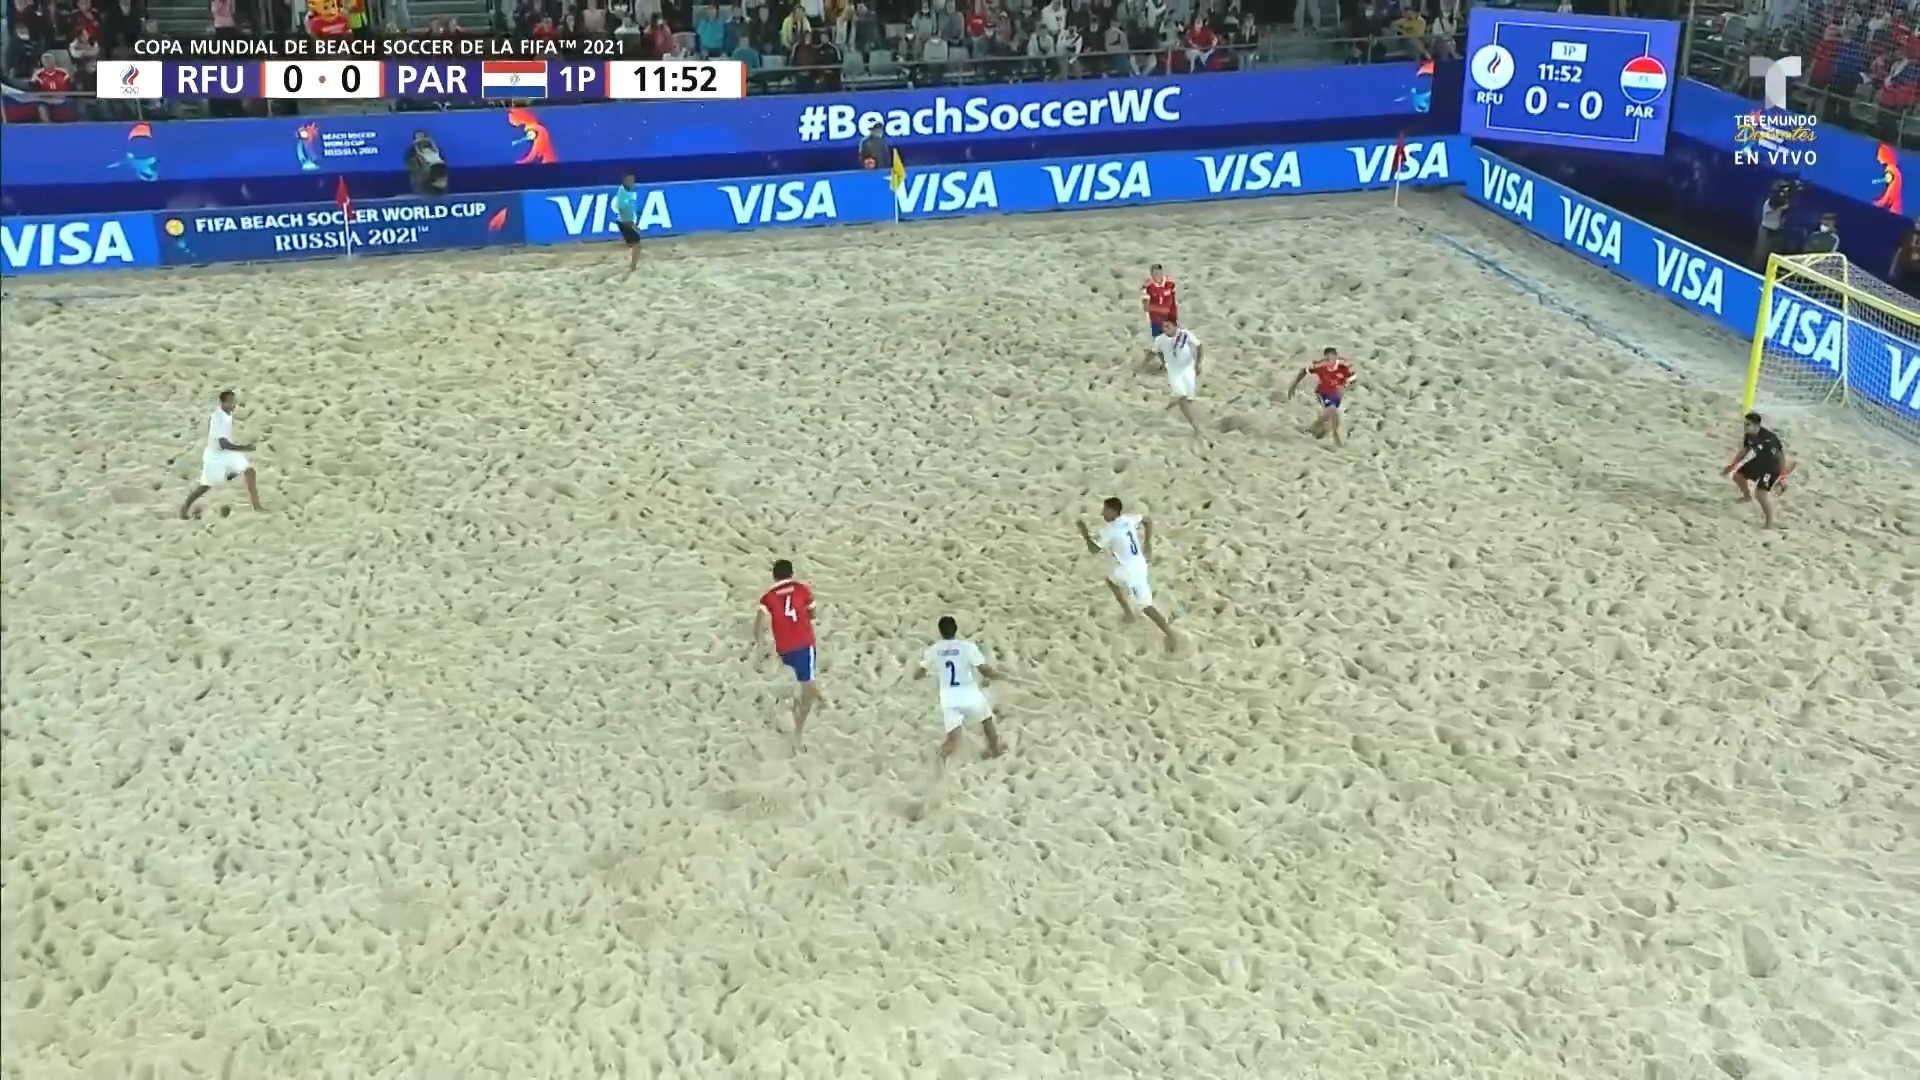 FIFA Beach Soccer World Cup Russia vs Paraguay 21/08/2021